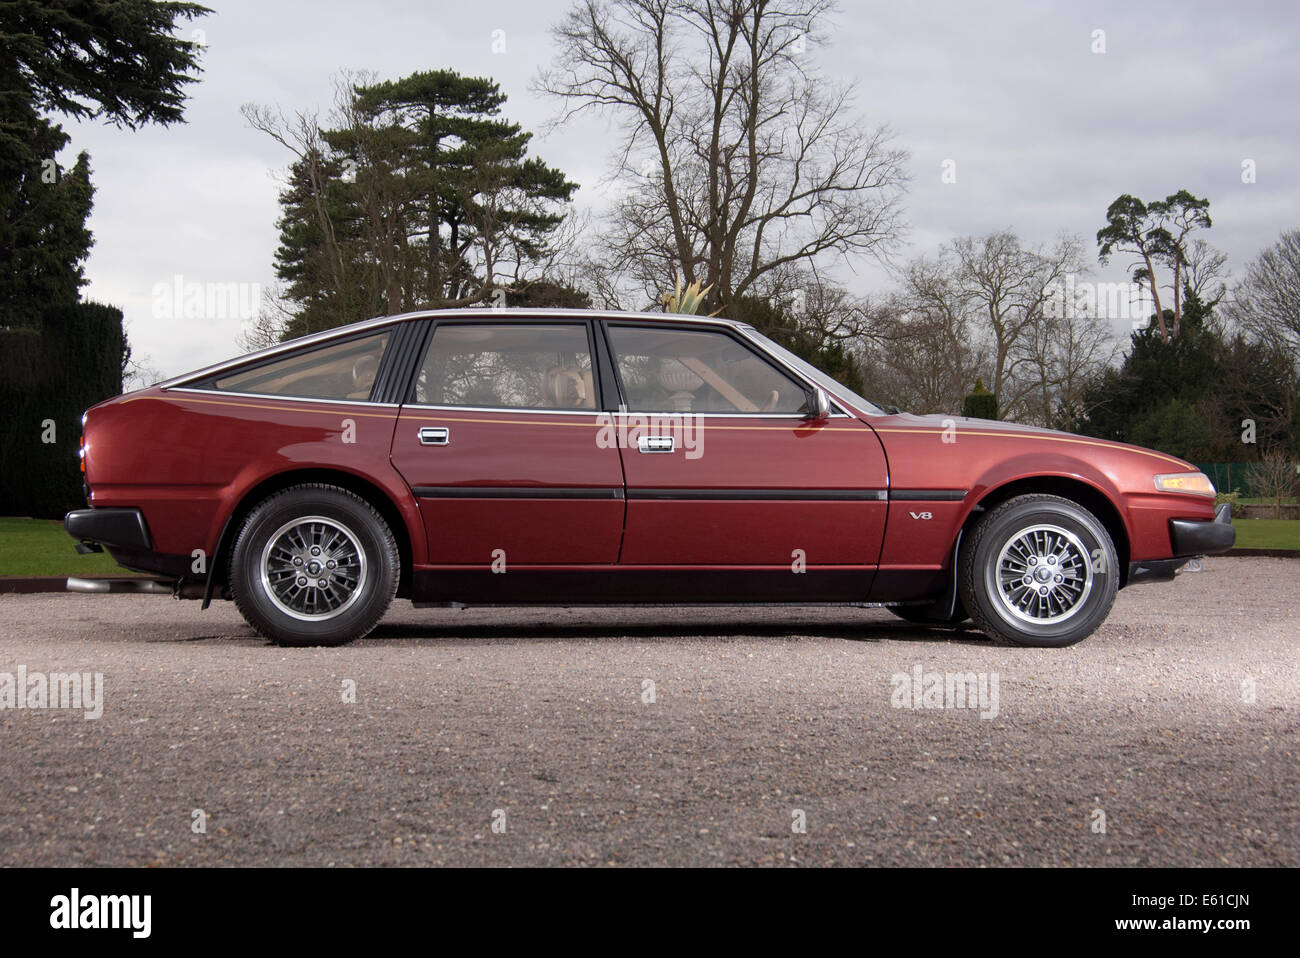 1981 Rover SD1 Vanden Plas V8 powered luxury car with sports car performance Stock Photo